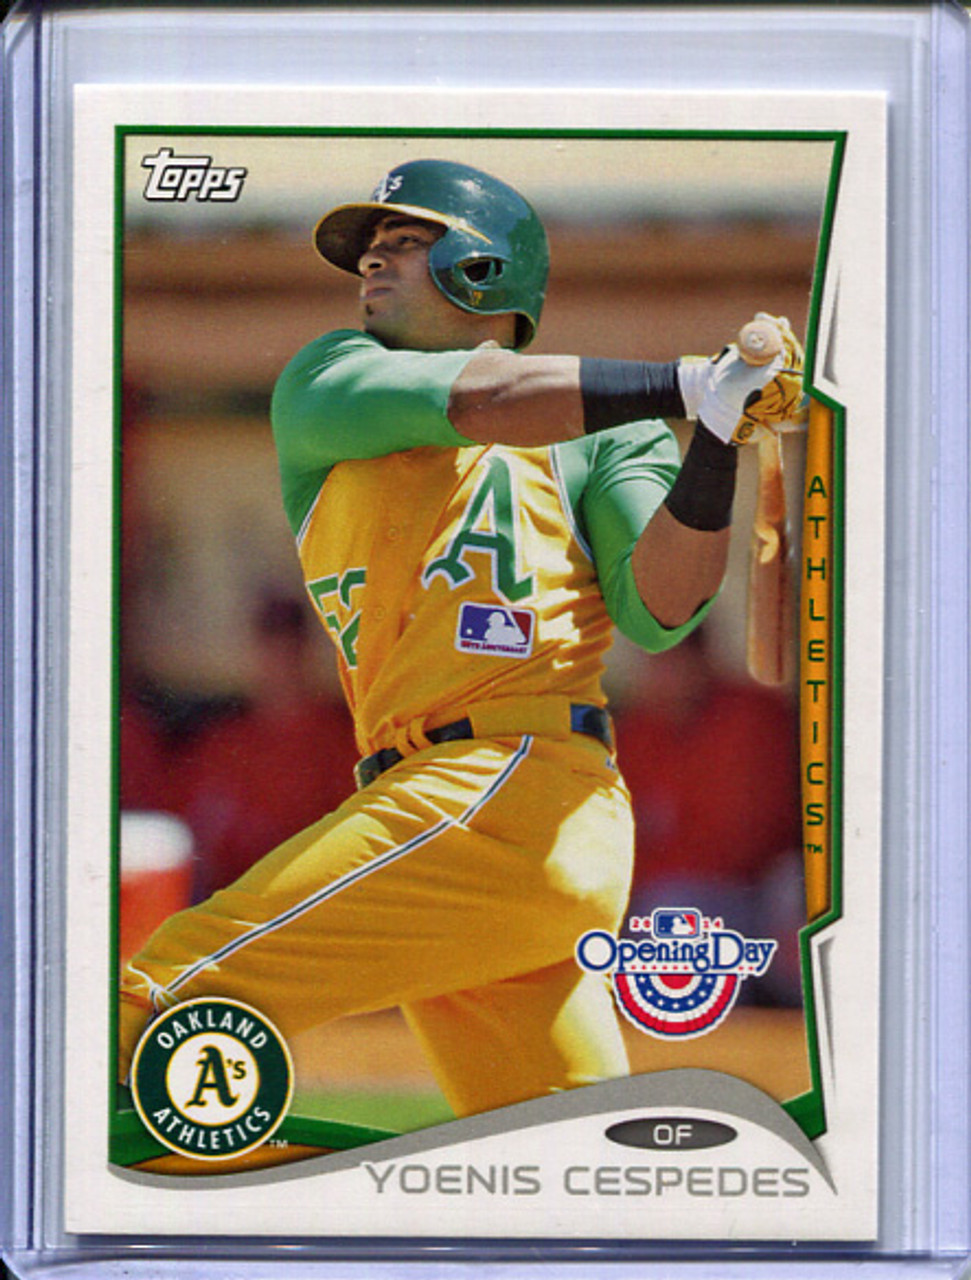 Yoenis Cespedes 2014 Opening Day #88